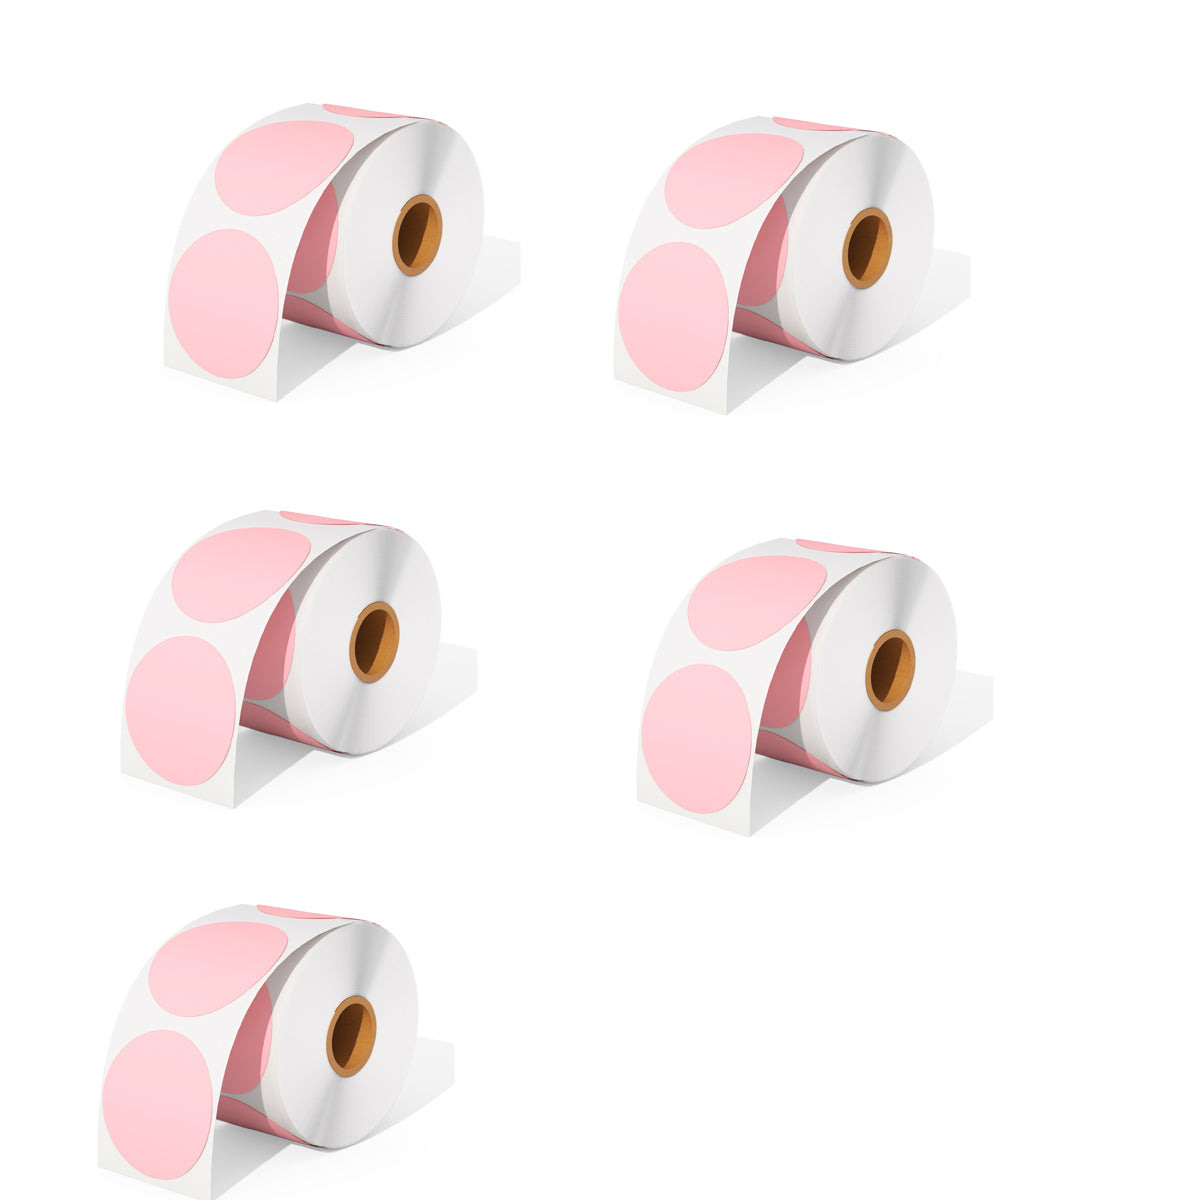 We offer five rolls of pink direct thermal round labels as a kit, with 750 labels per roll.